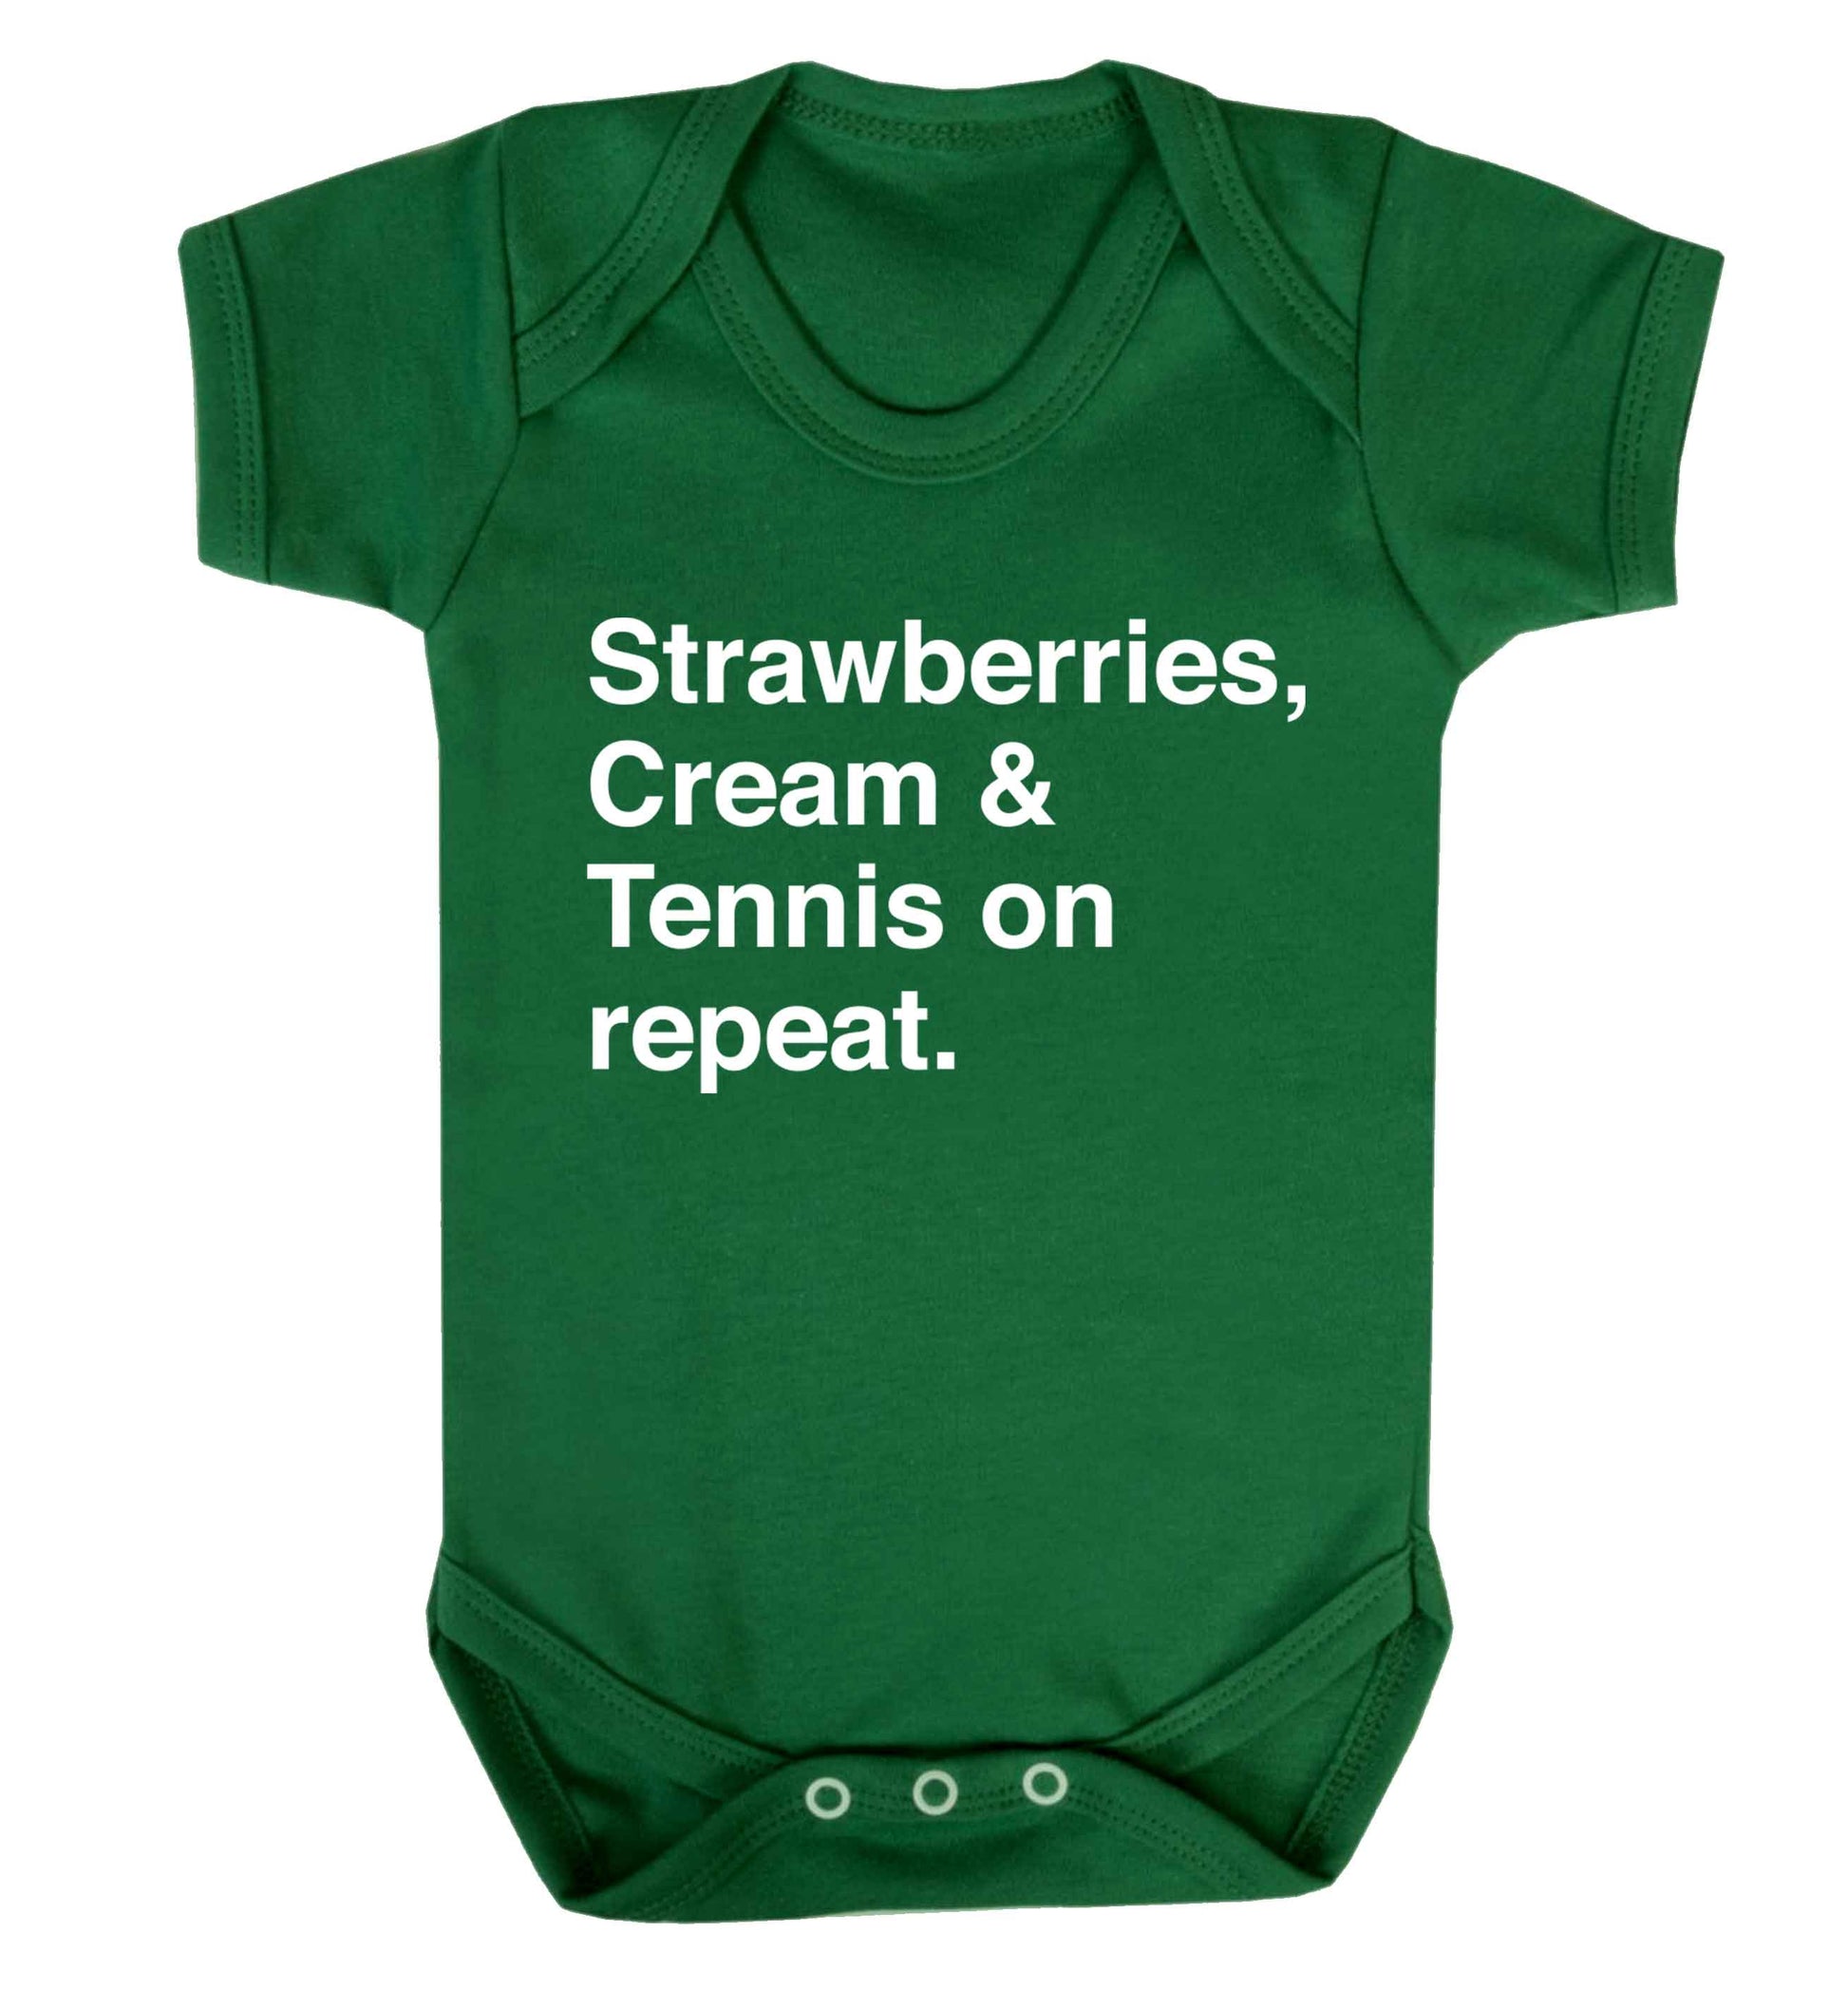 Strawberries, cream and tennis on repeat Baby Vest green 18-24 months